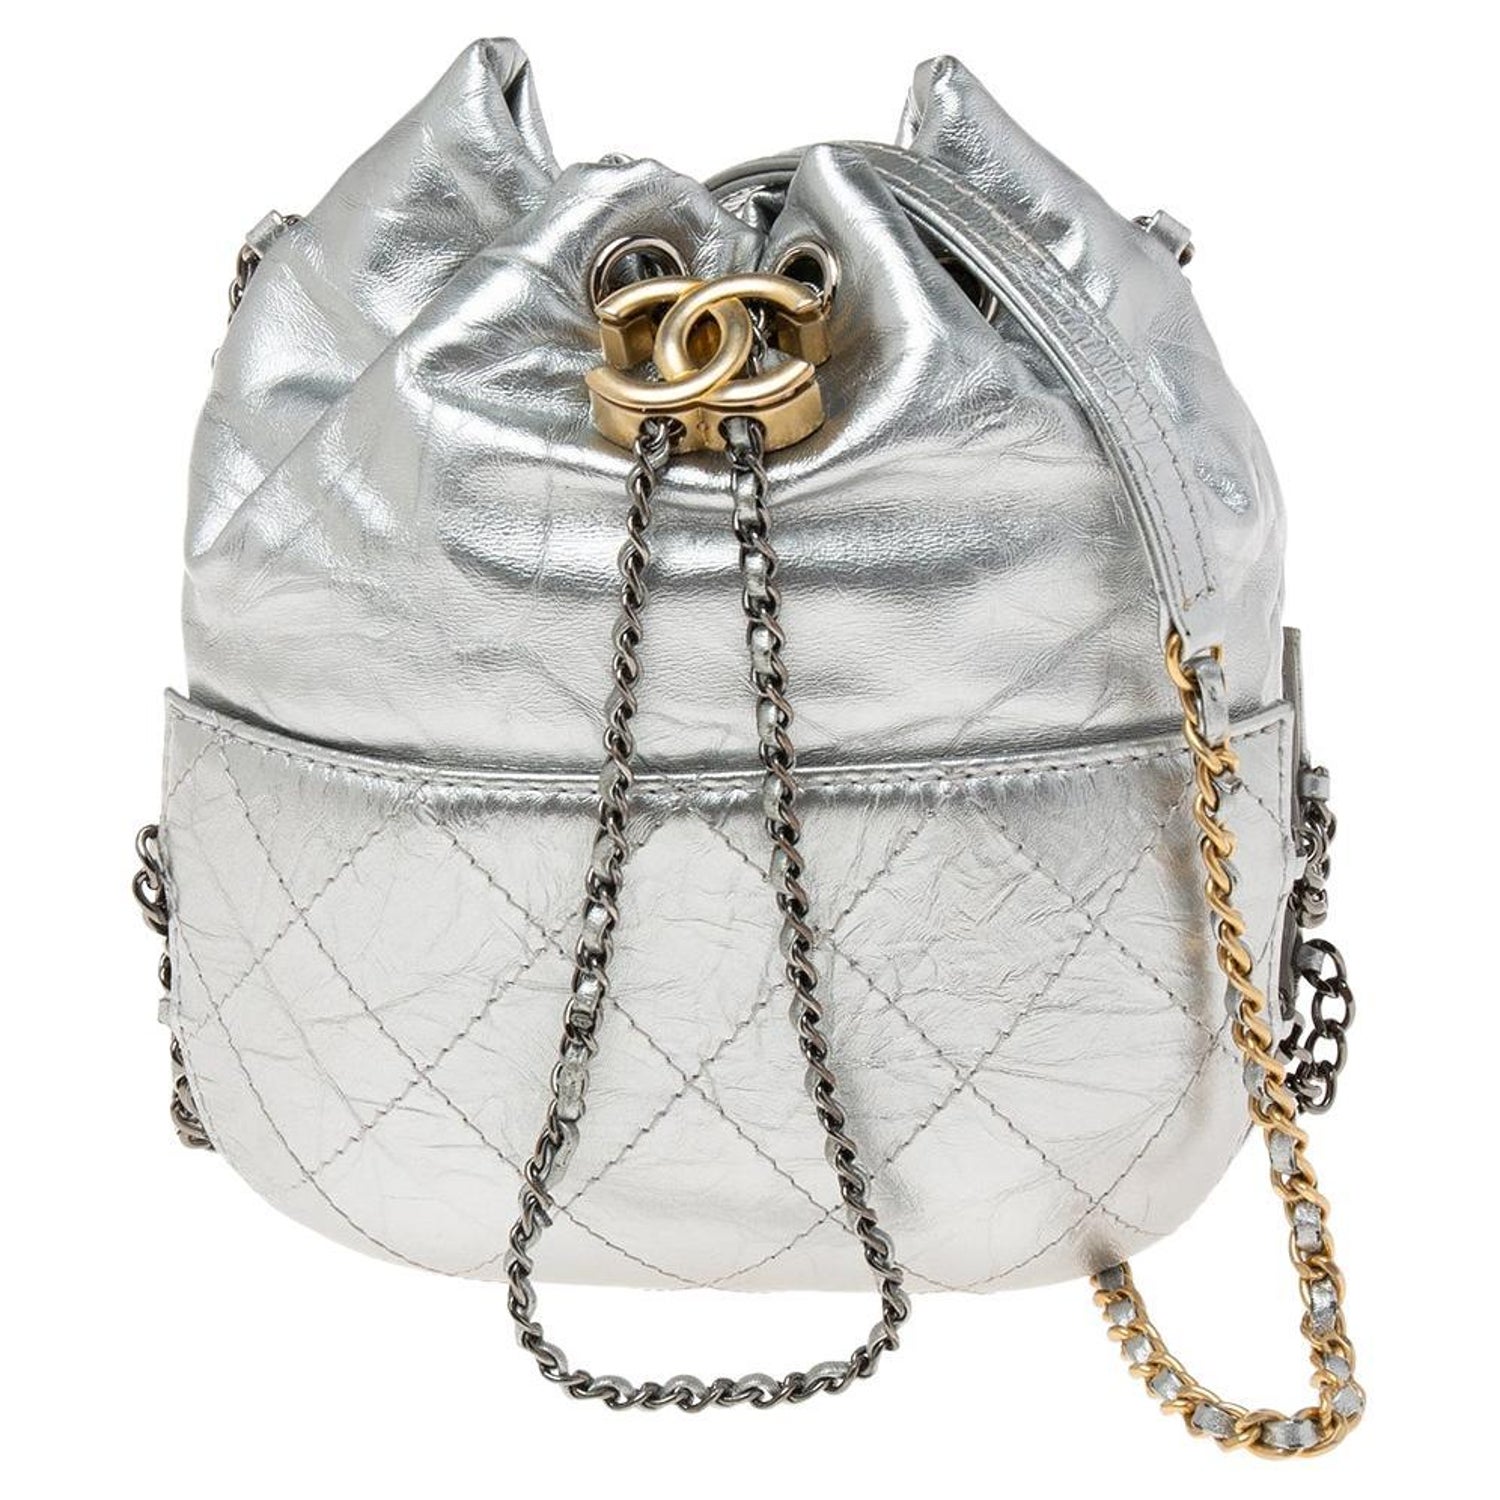 The Bag Broker - CHANEL GABRIELLE BUCKET BAG, $2500 ✨, Payment plans  available on all products!